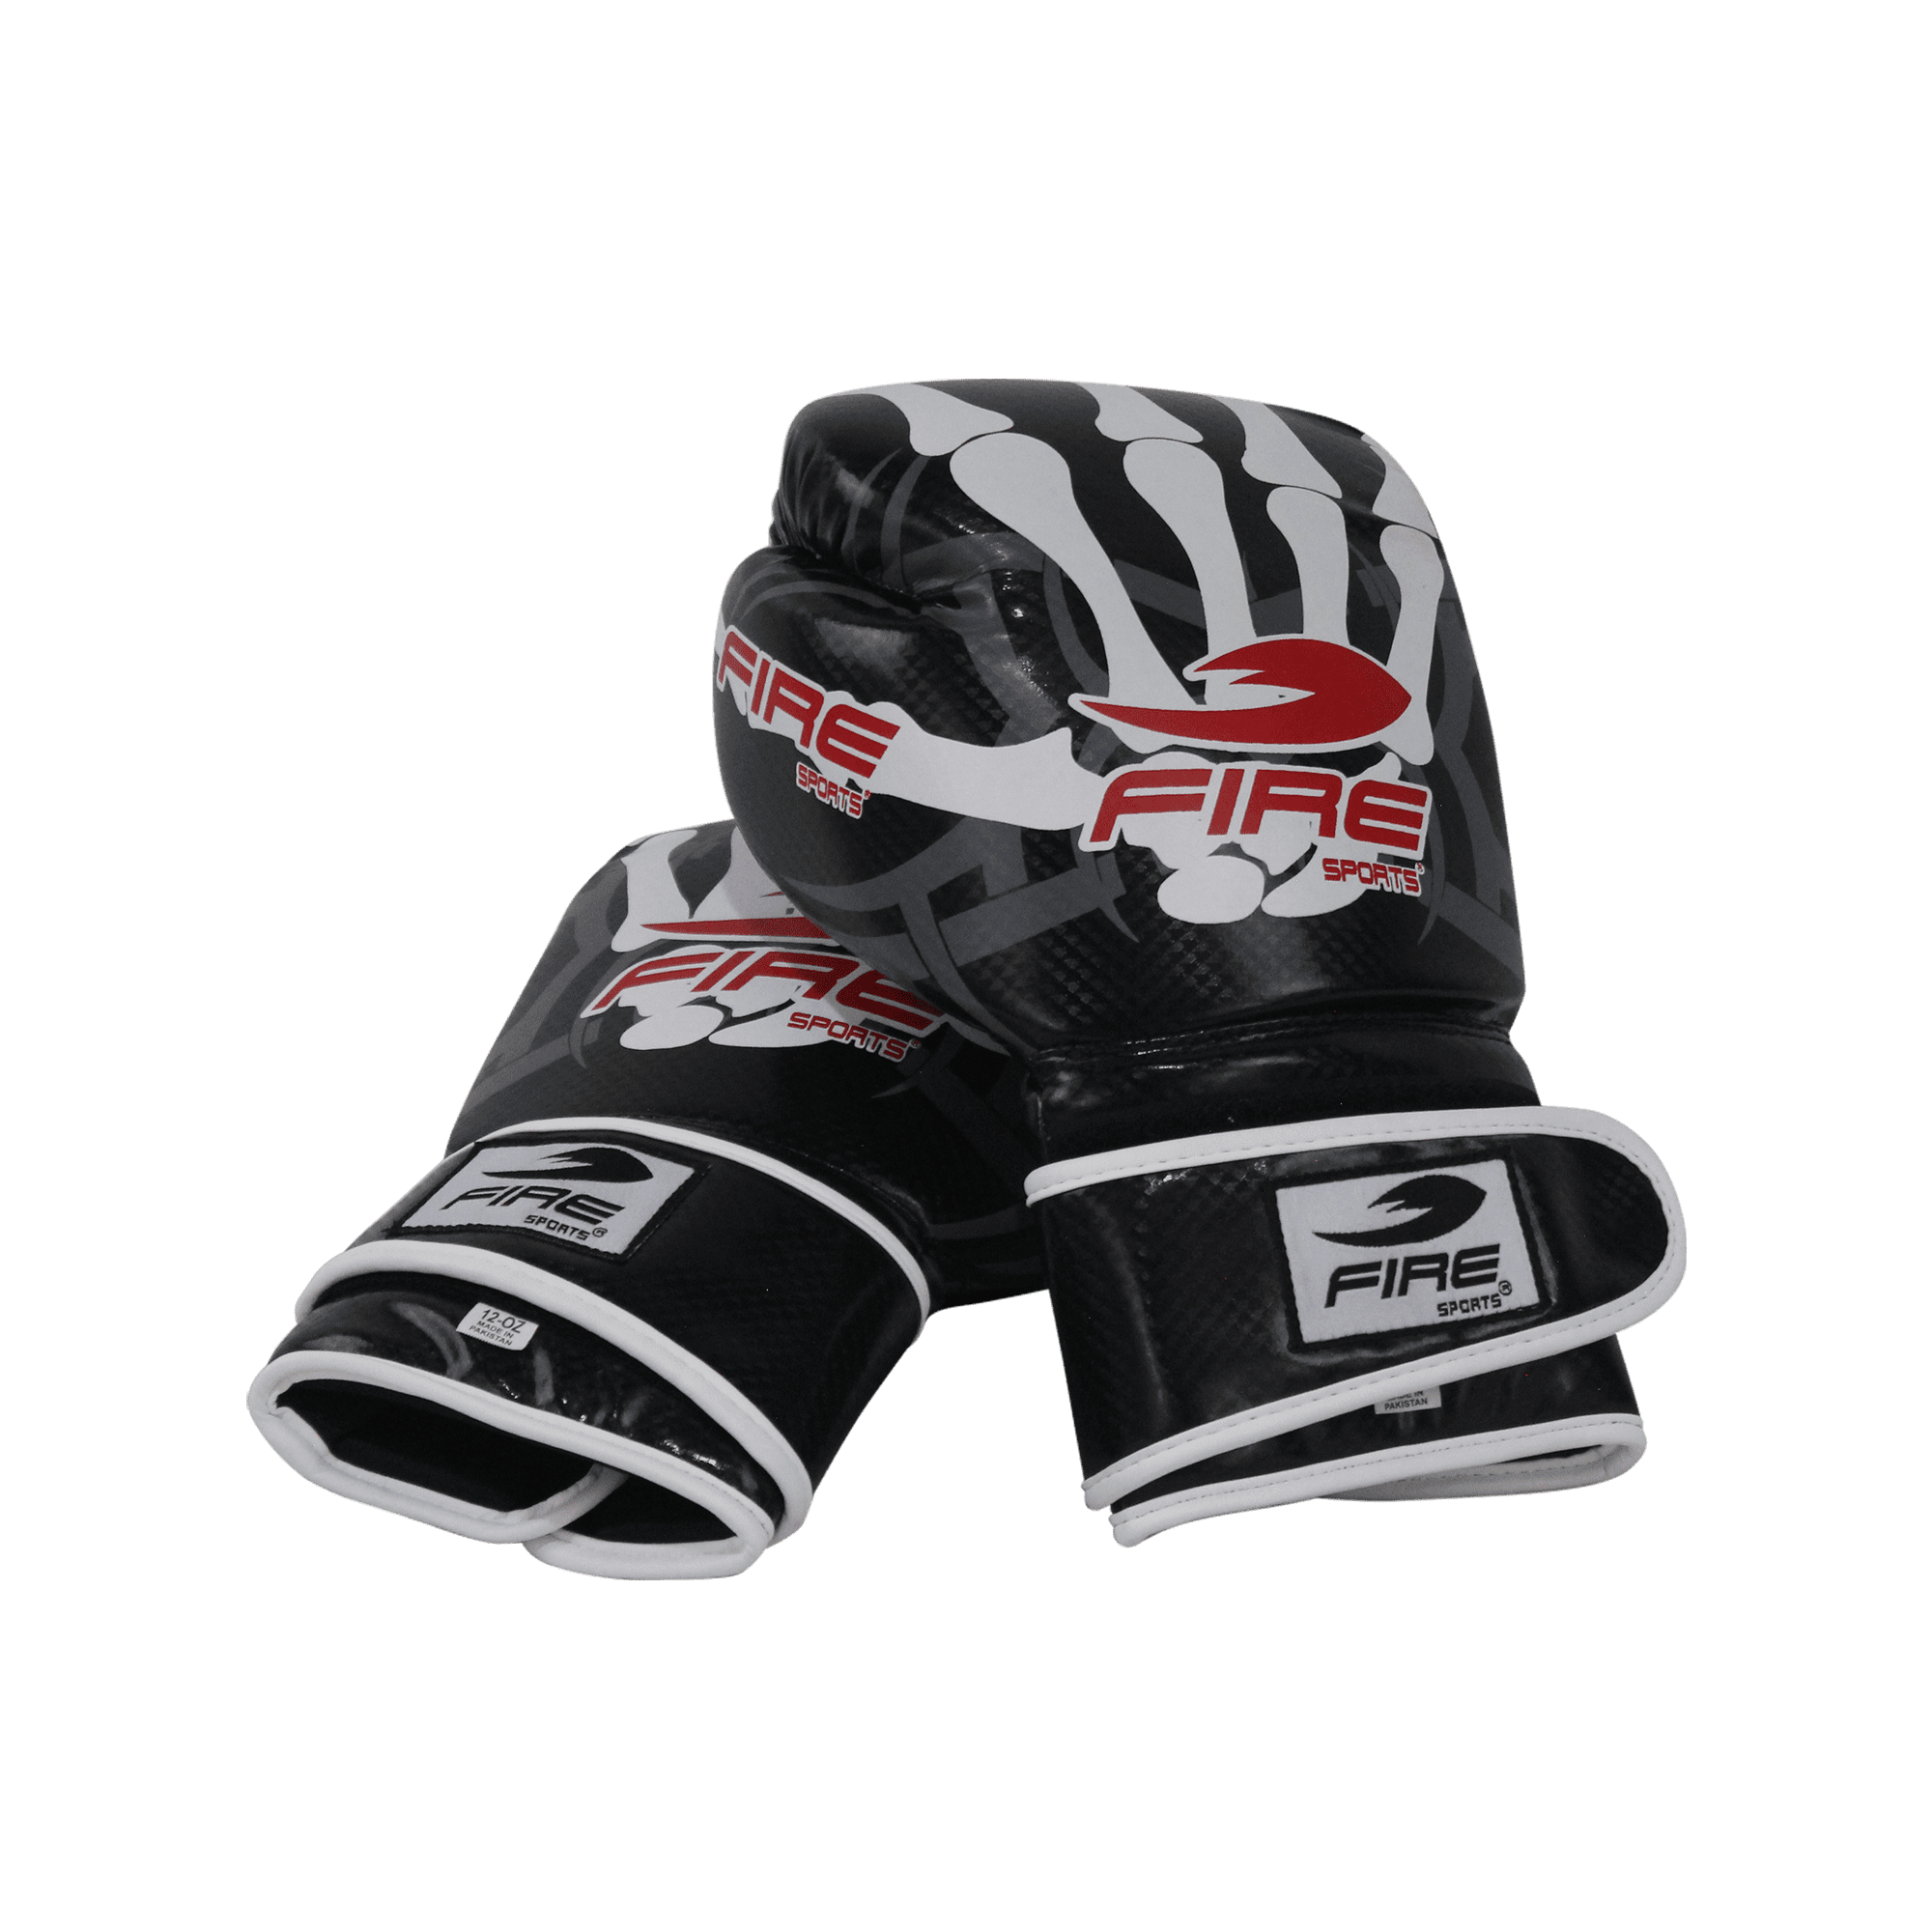 Guantes – Fire Sports